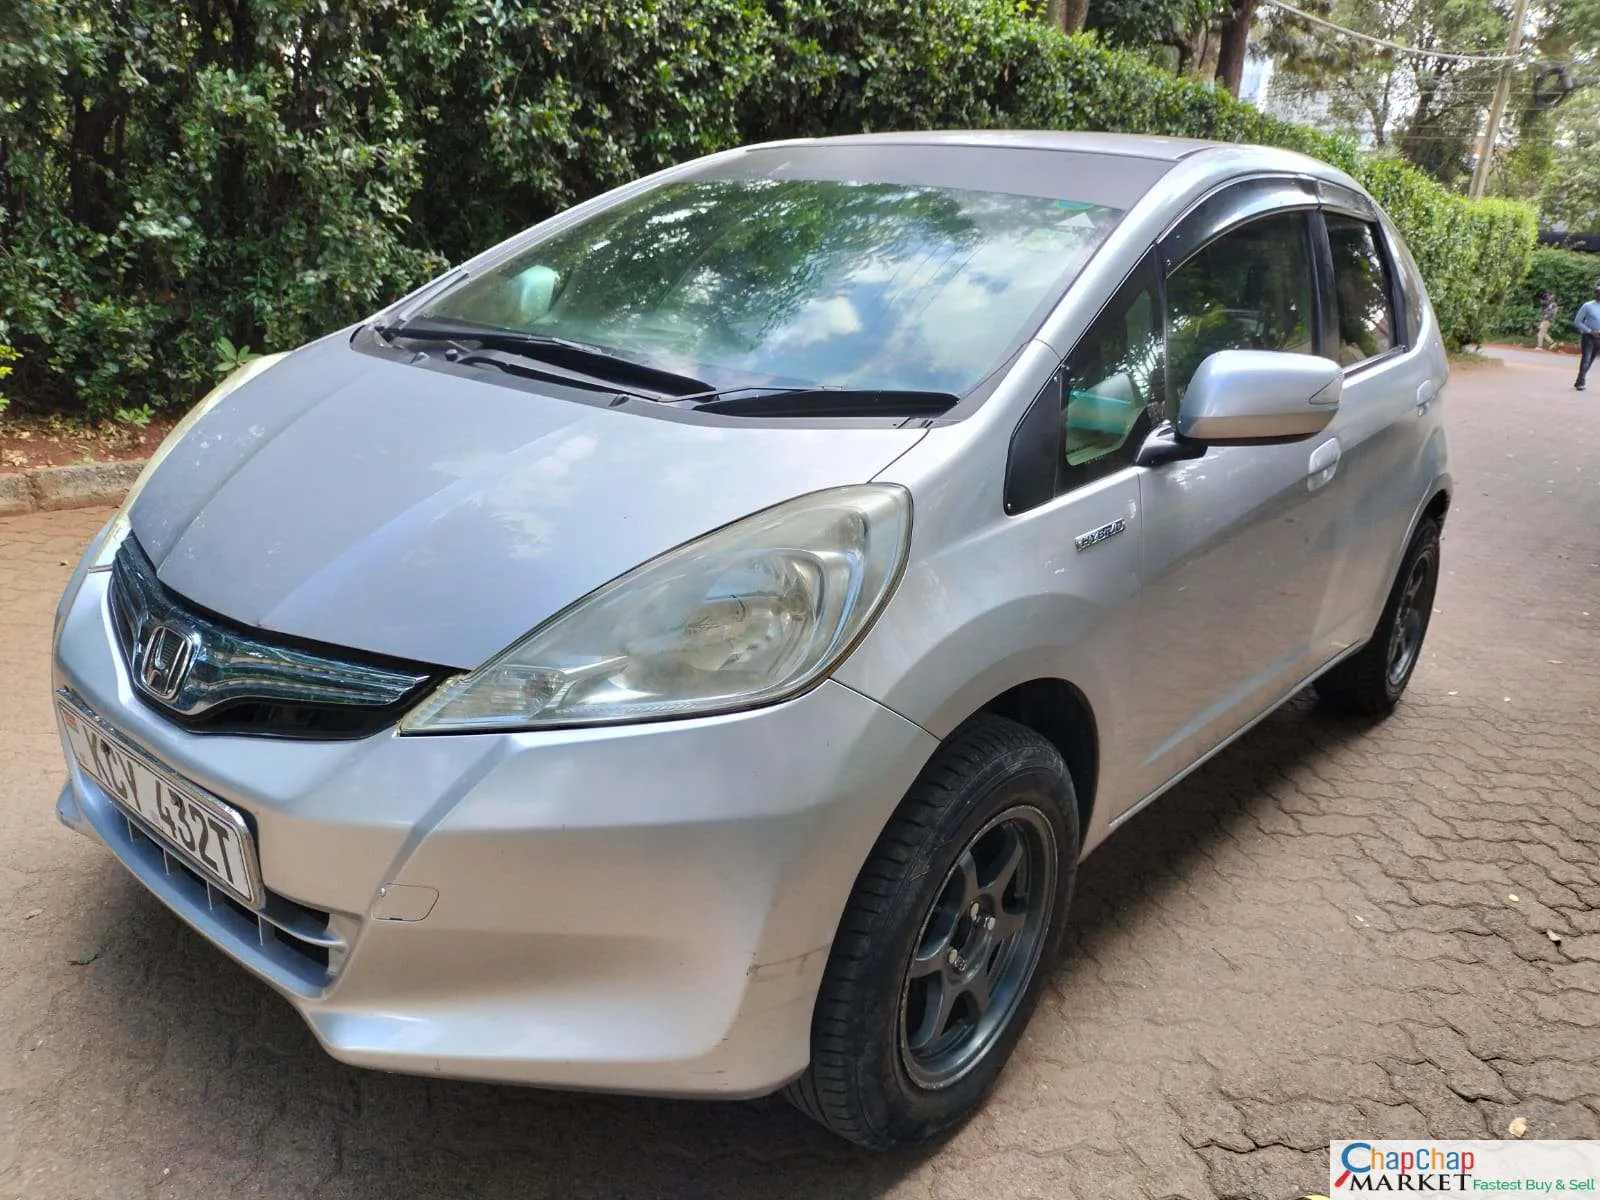 Honda fit QUICK SALE You Pay 30% Deposit Trade in OK Wow hire purchase installments